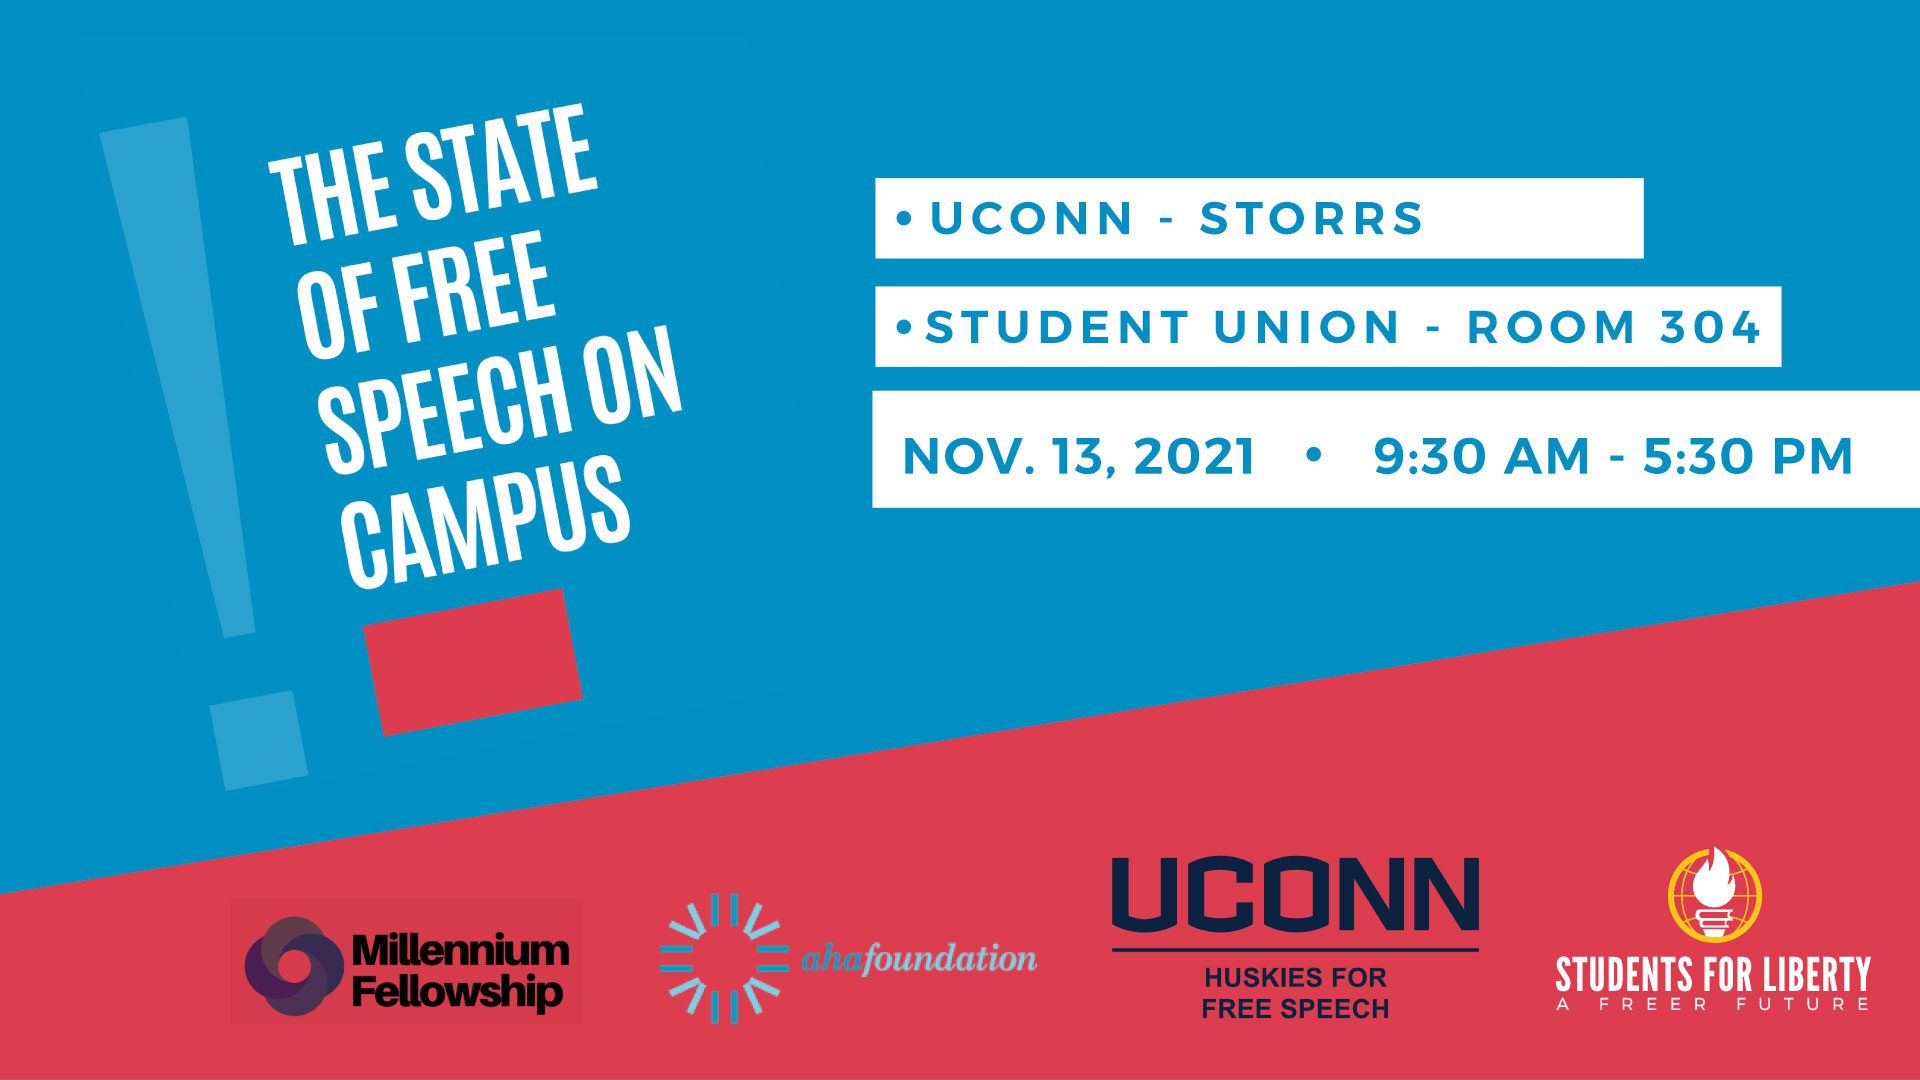 Students For Liberty activist and author of a statement defending free speech, Isadore Johnson, is hosting a free speech conference at UConn on November 13